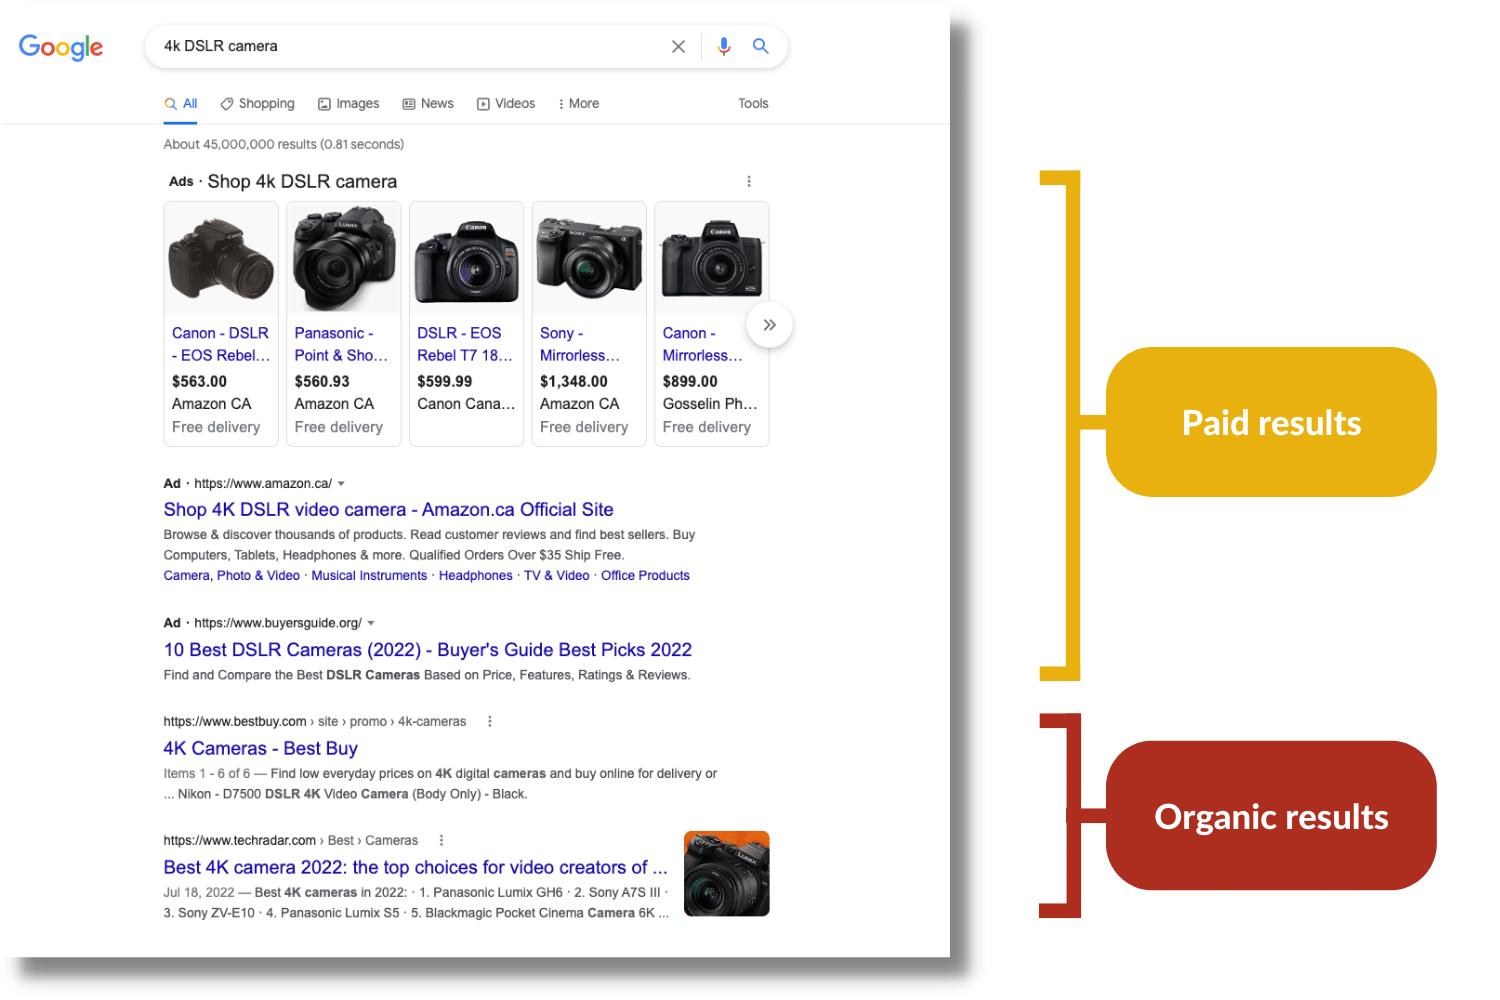 Paid results vs organic results on Google